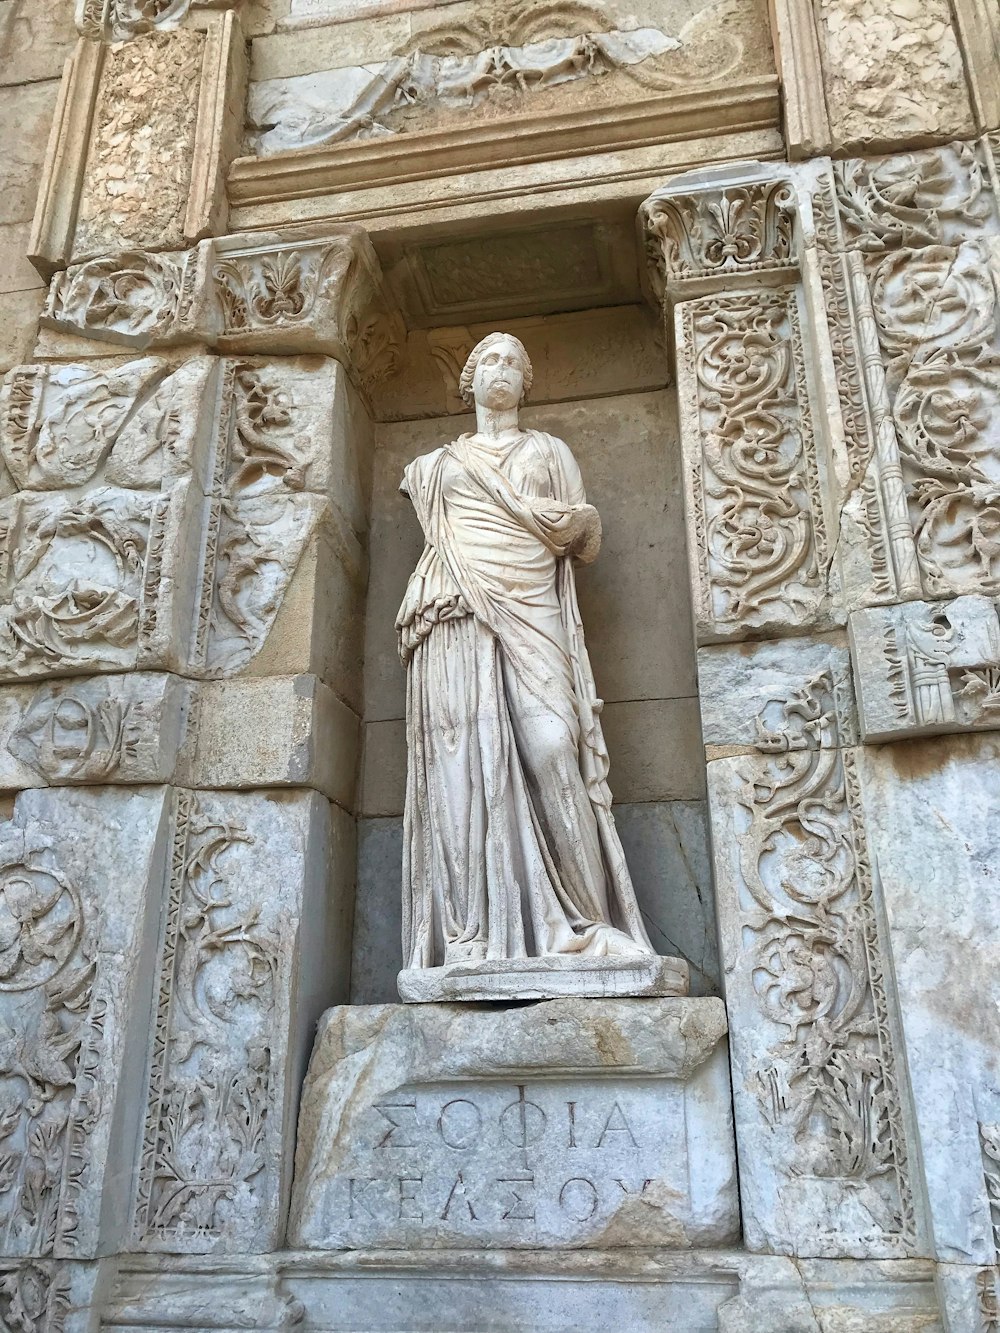 a statue of a woman standing in a doorway